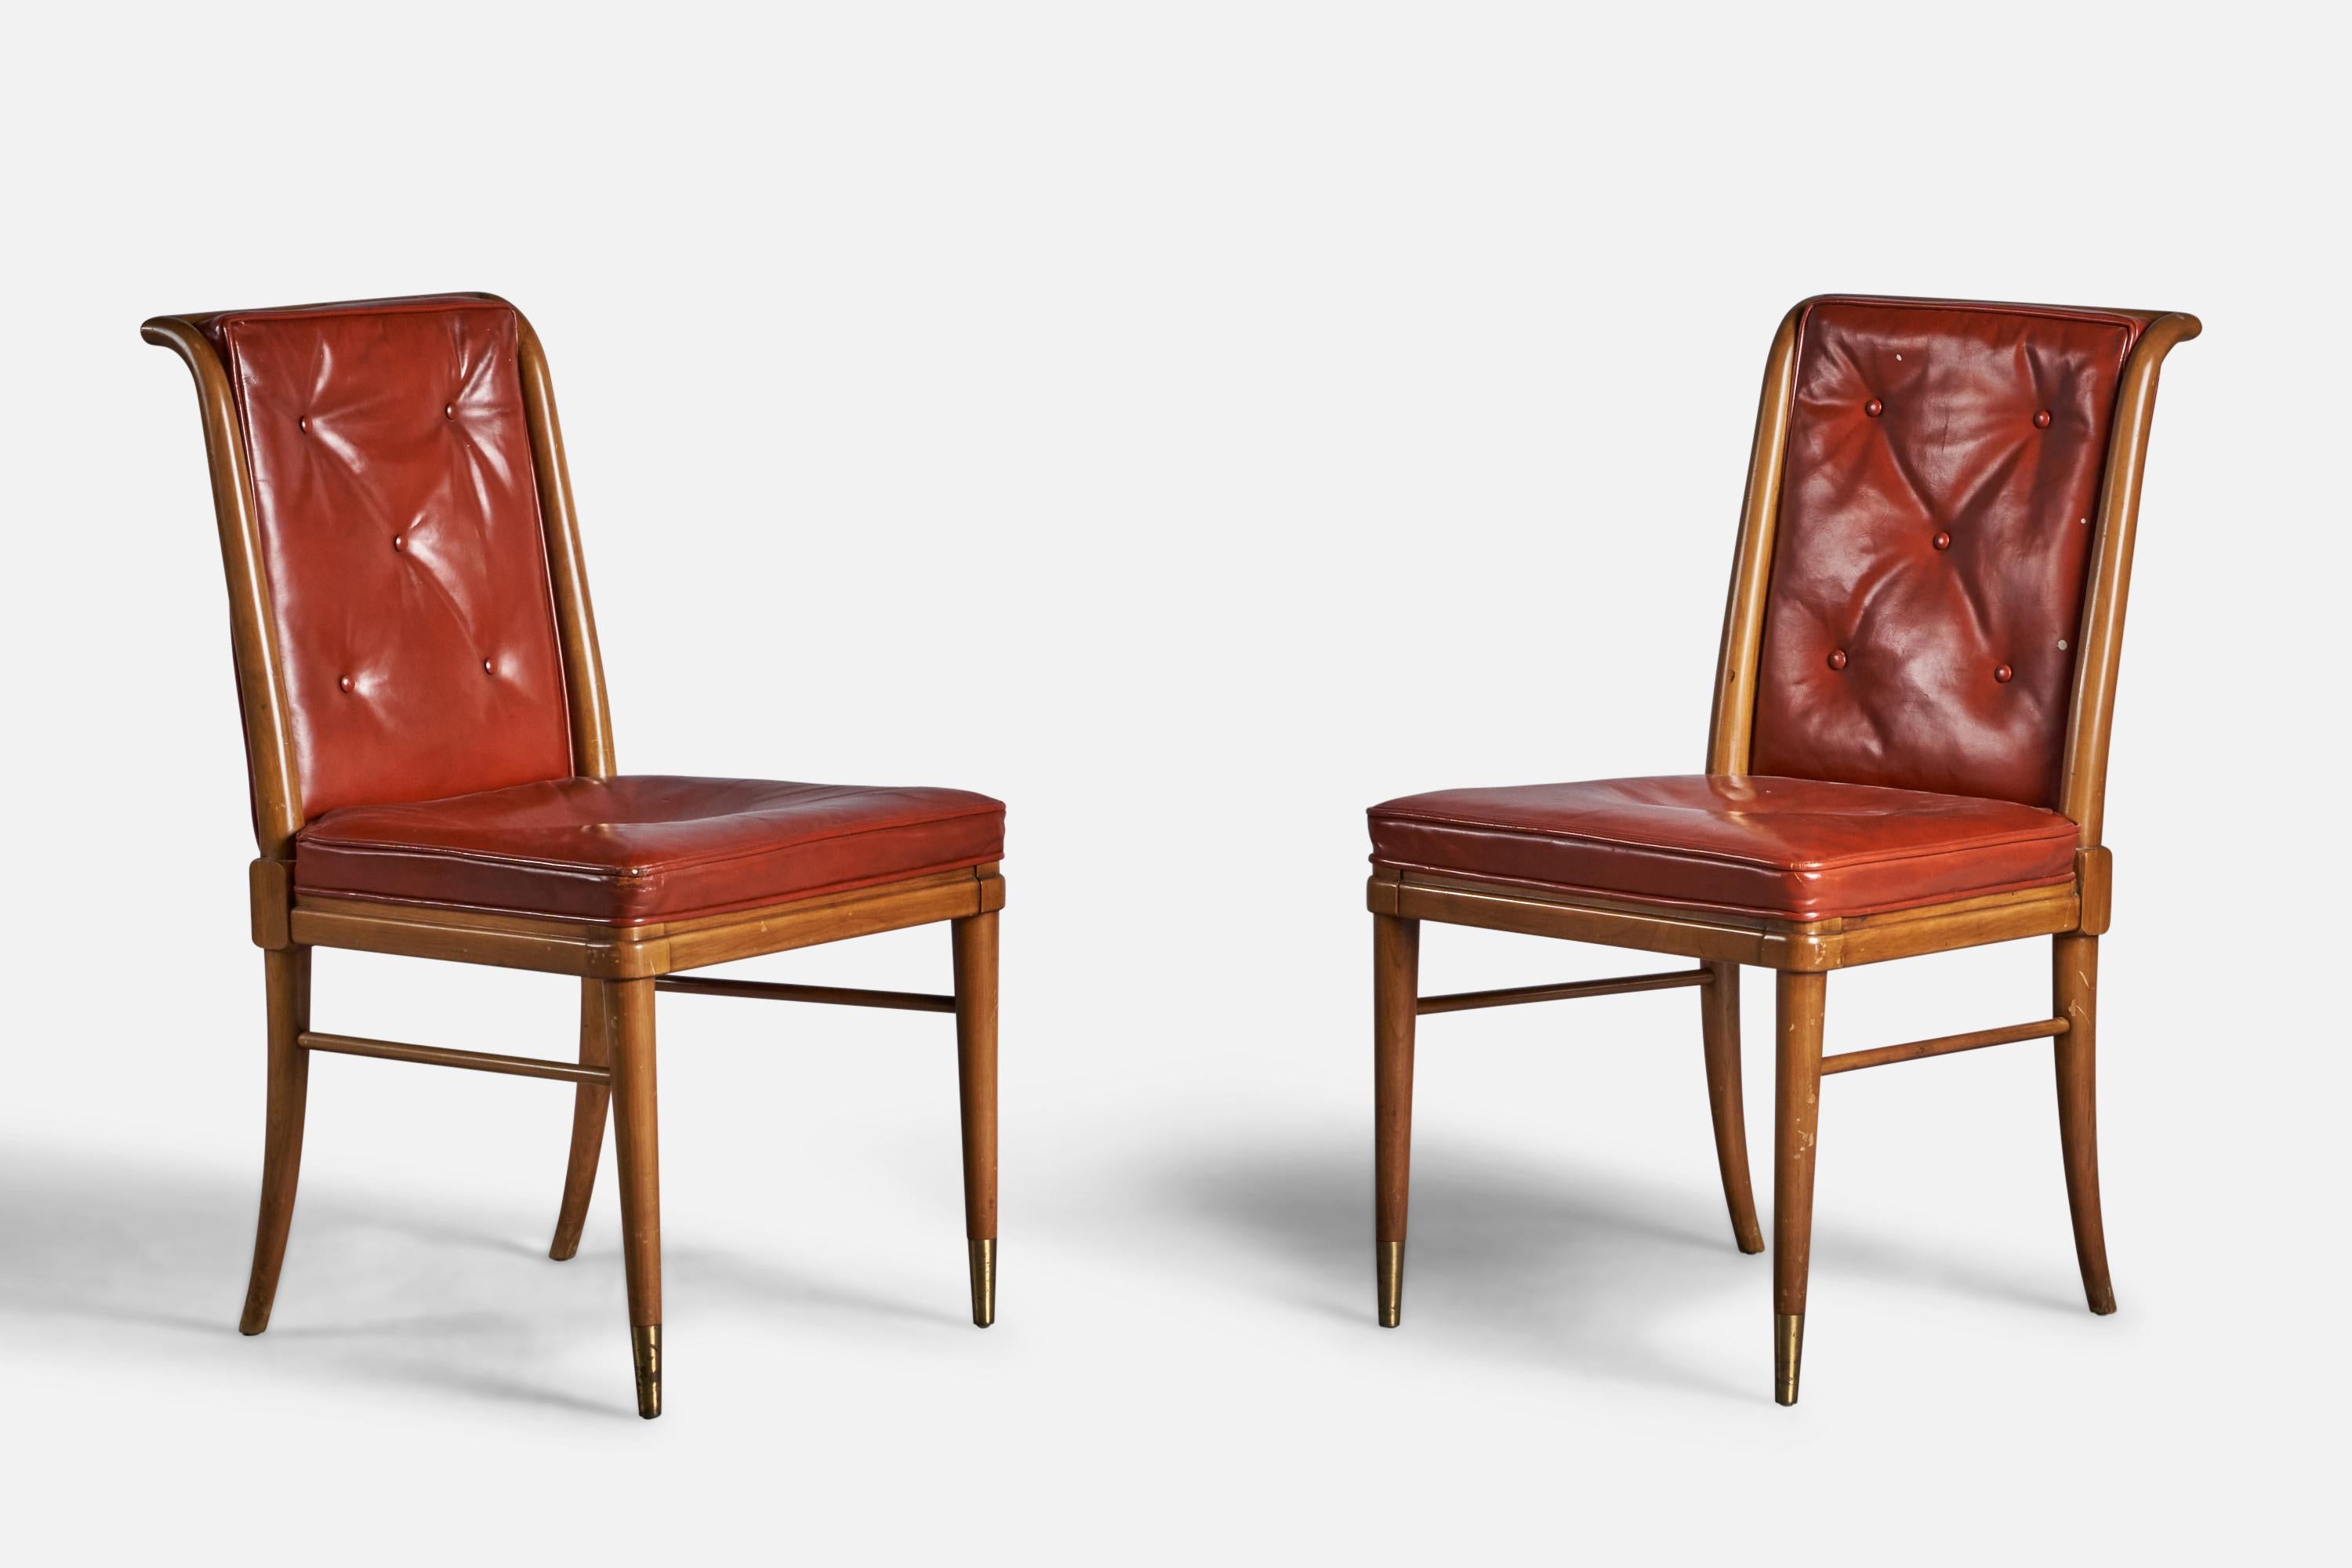 A pair of walnut and leather side chairs designed and produced by John Widdicomb, USA, c. 1940s.

18.25” seat height